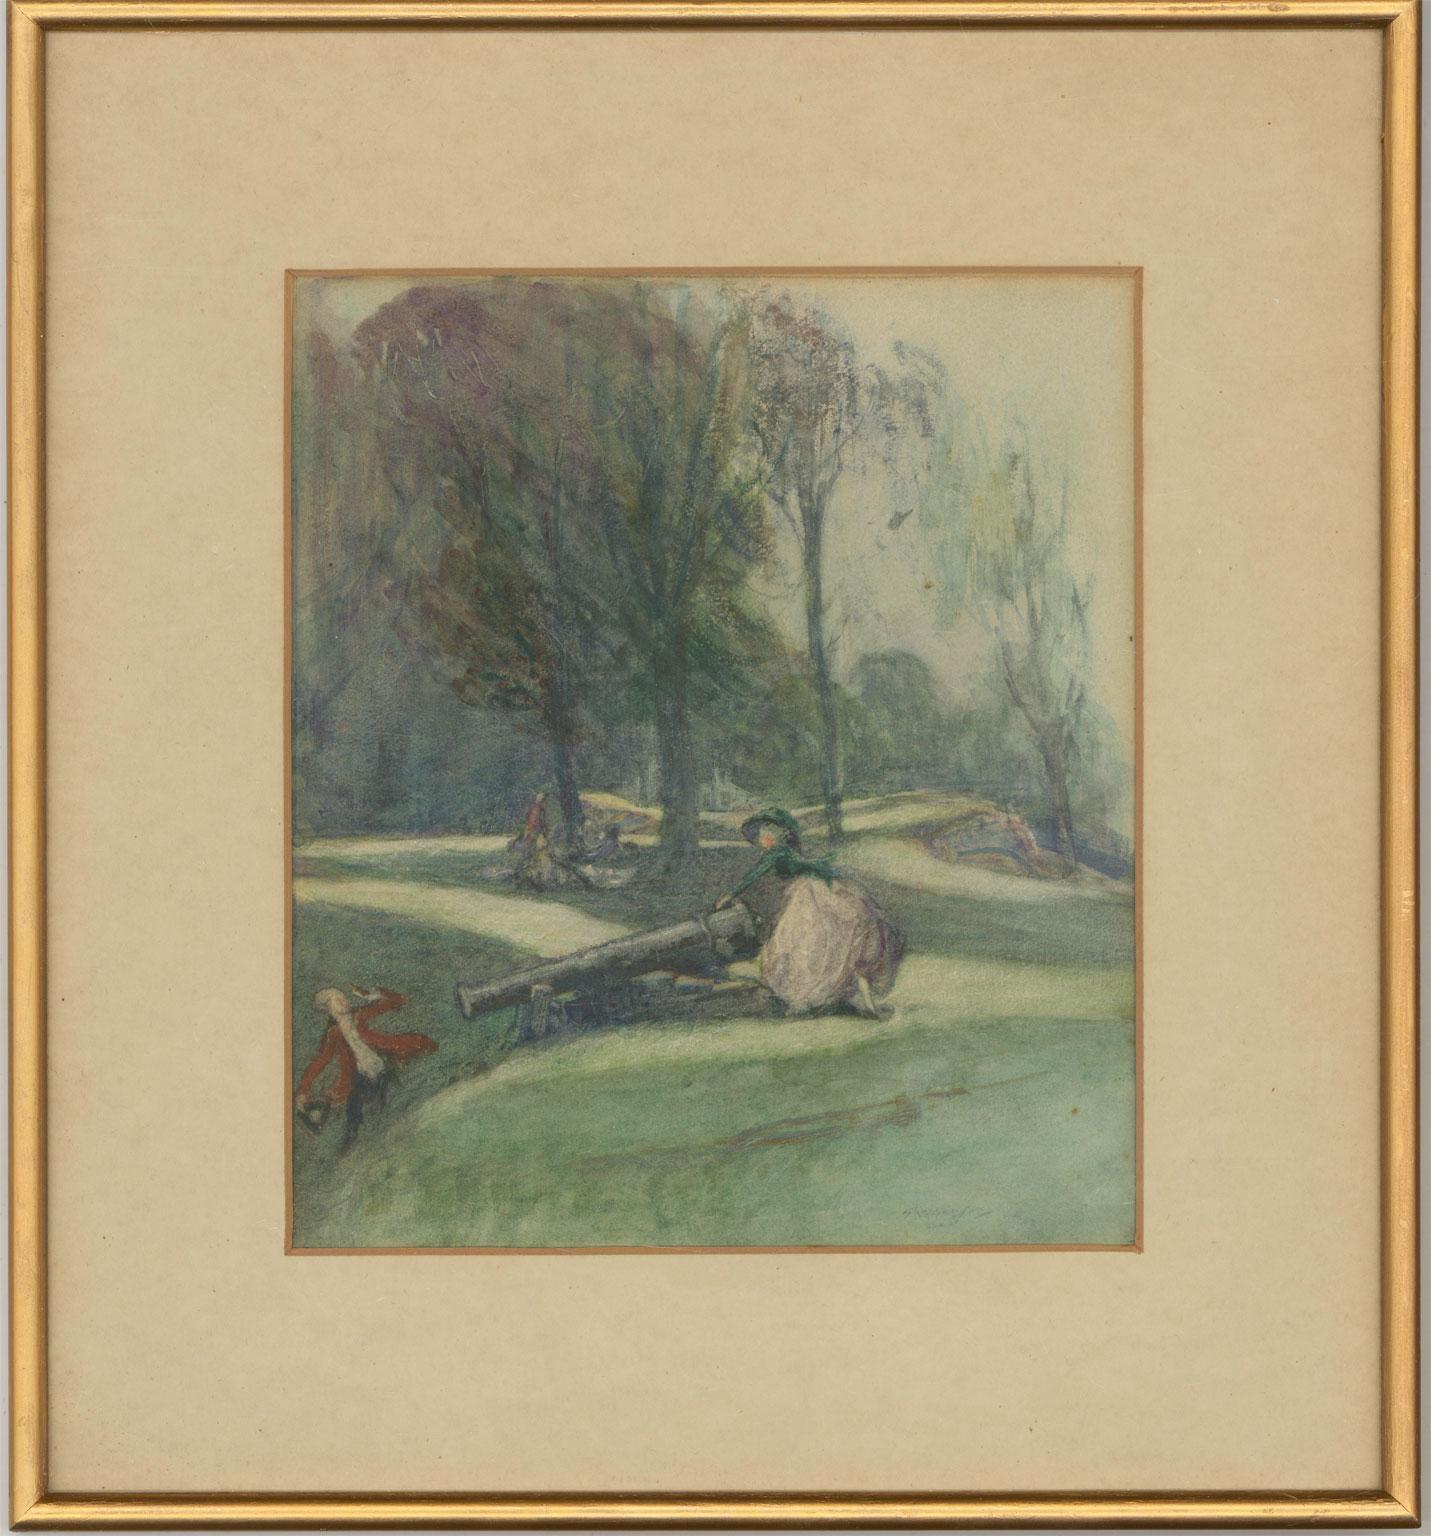 A fine watercolour painting with gouache details, small areas of sgraffito and gum arabic by the artist Claude Allin Shepperson (1867-1921) ARA ARWS RE LSC ROI. The scene depicts a landscape with trees, and two figures playing around a cannon.